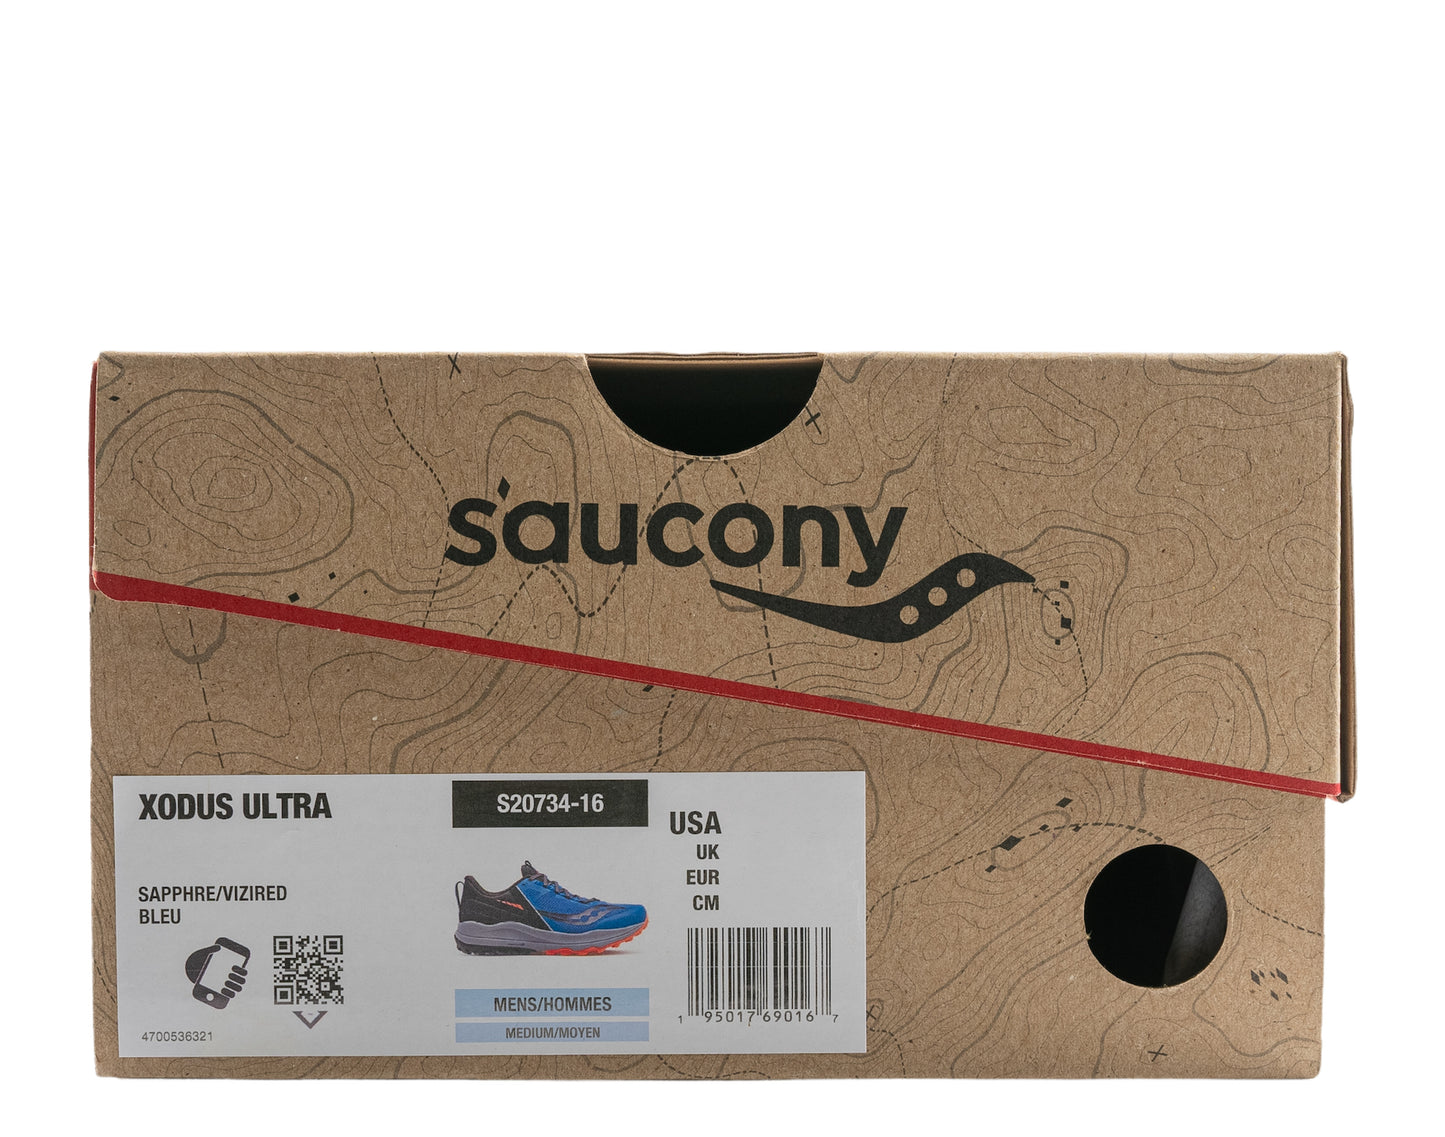 Saucony Xodus Ultra Men's Trail Running Shoes